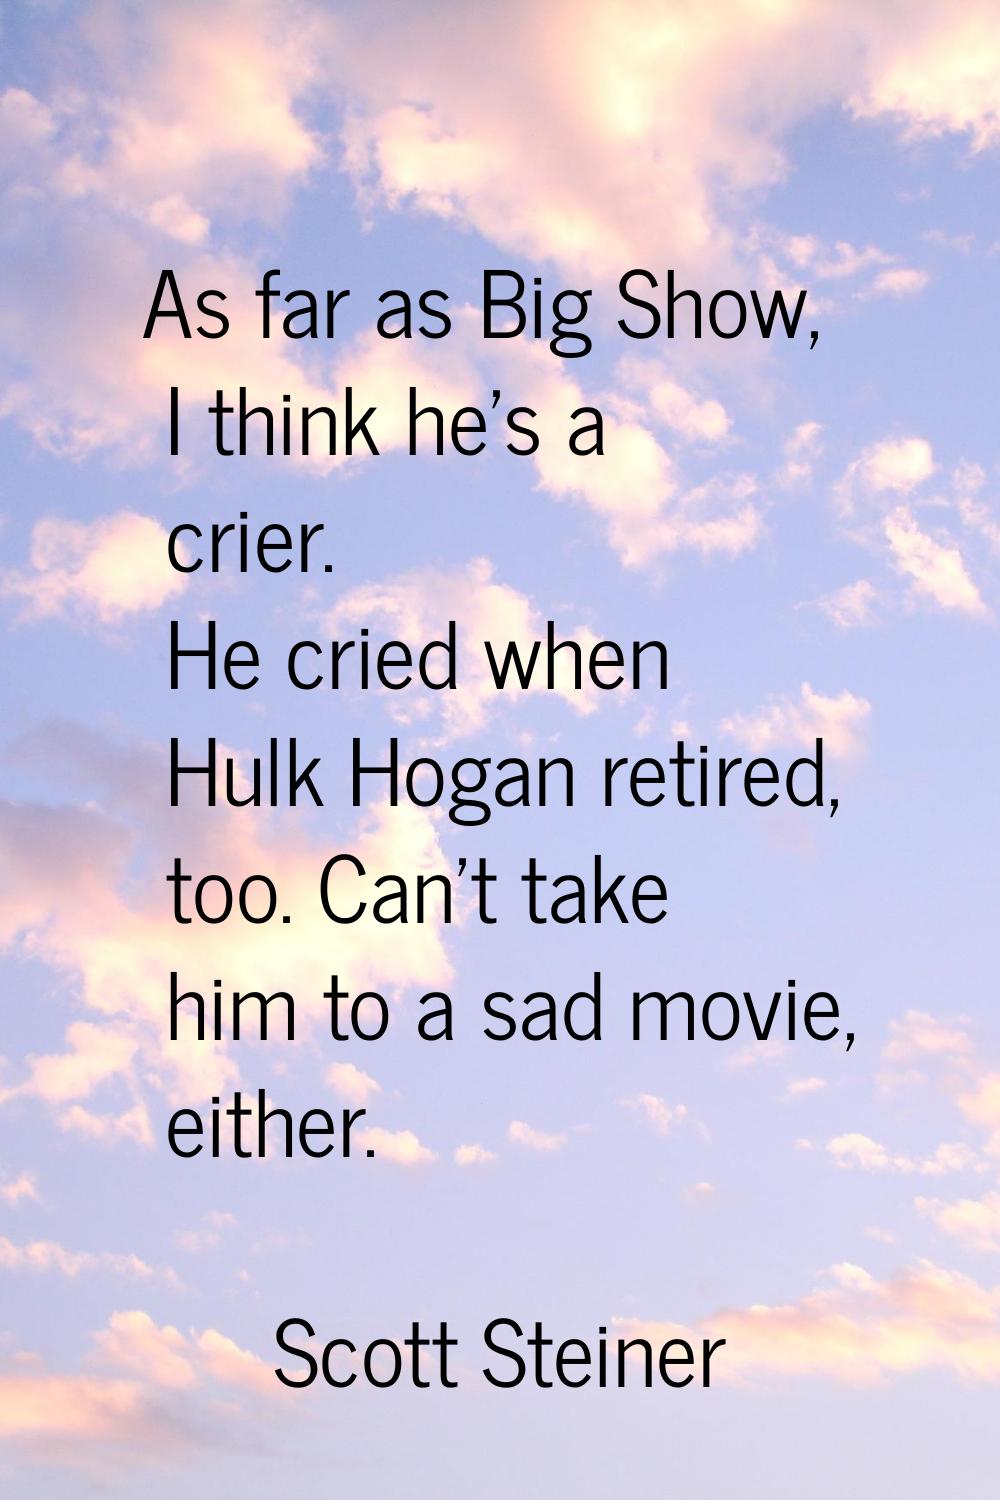 As far as Big Show, I think he's a crier. He cried when Hulk Hogan retired, too. Can't take him to 